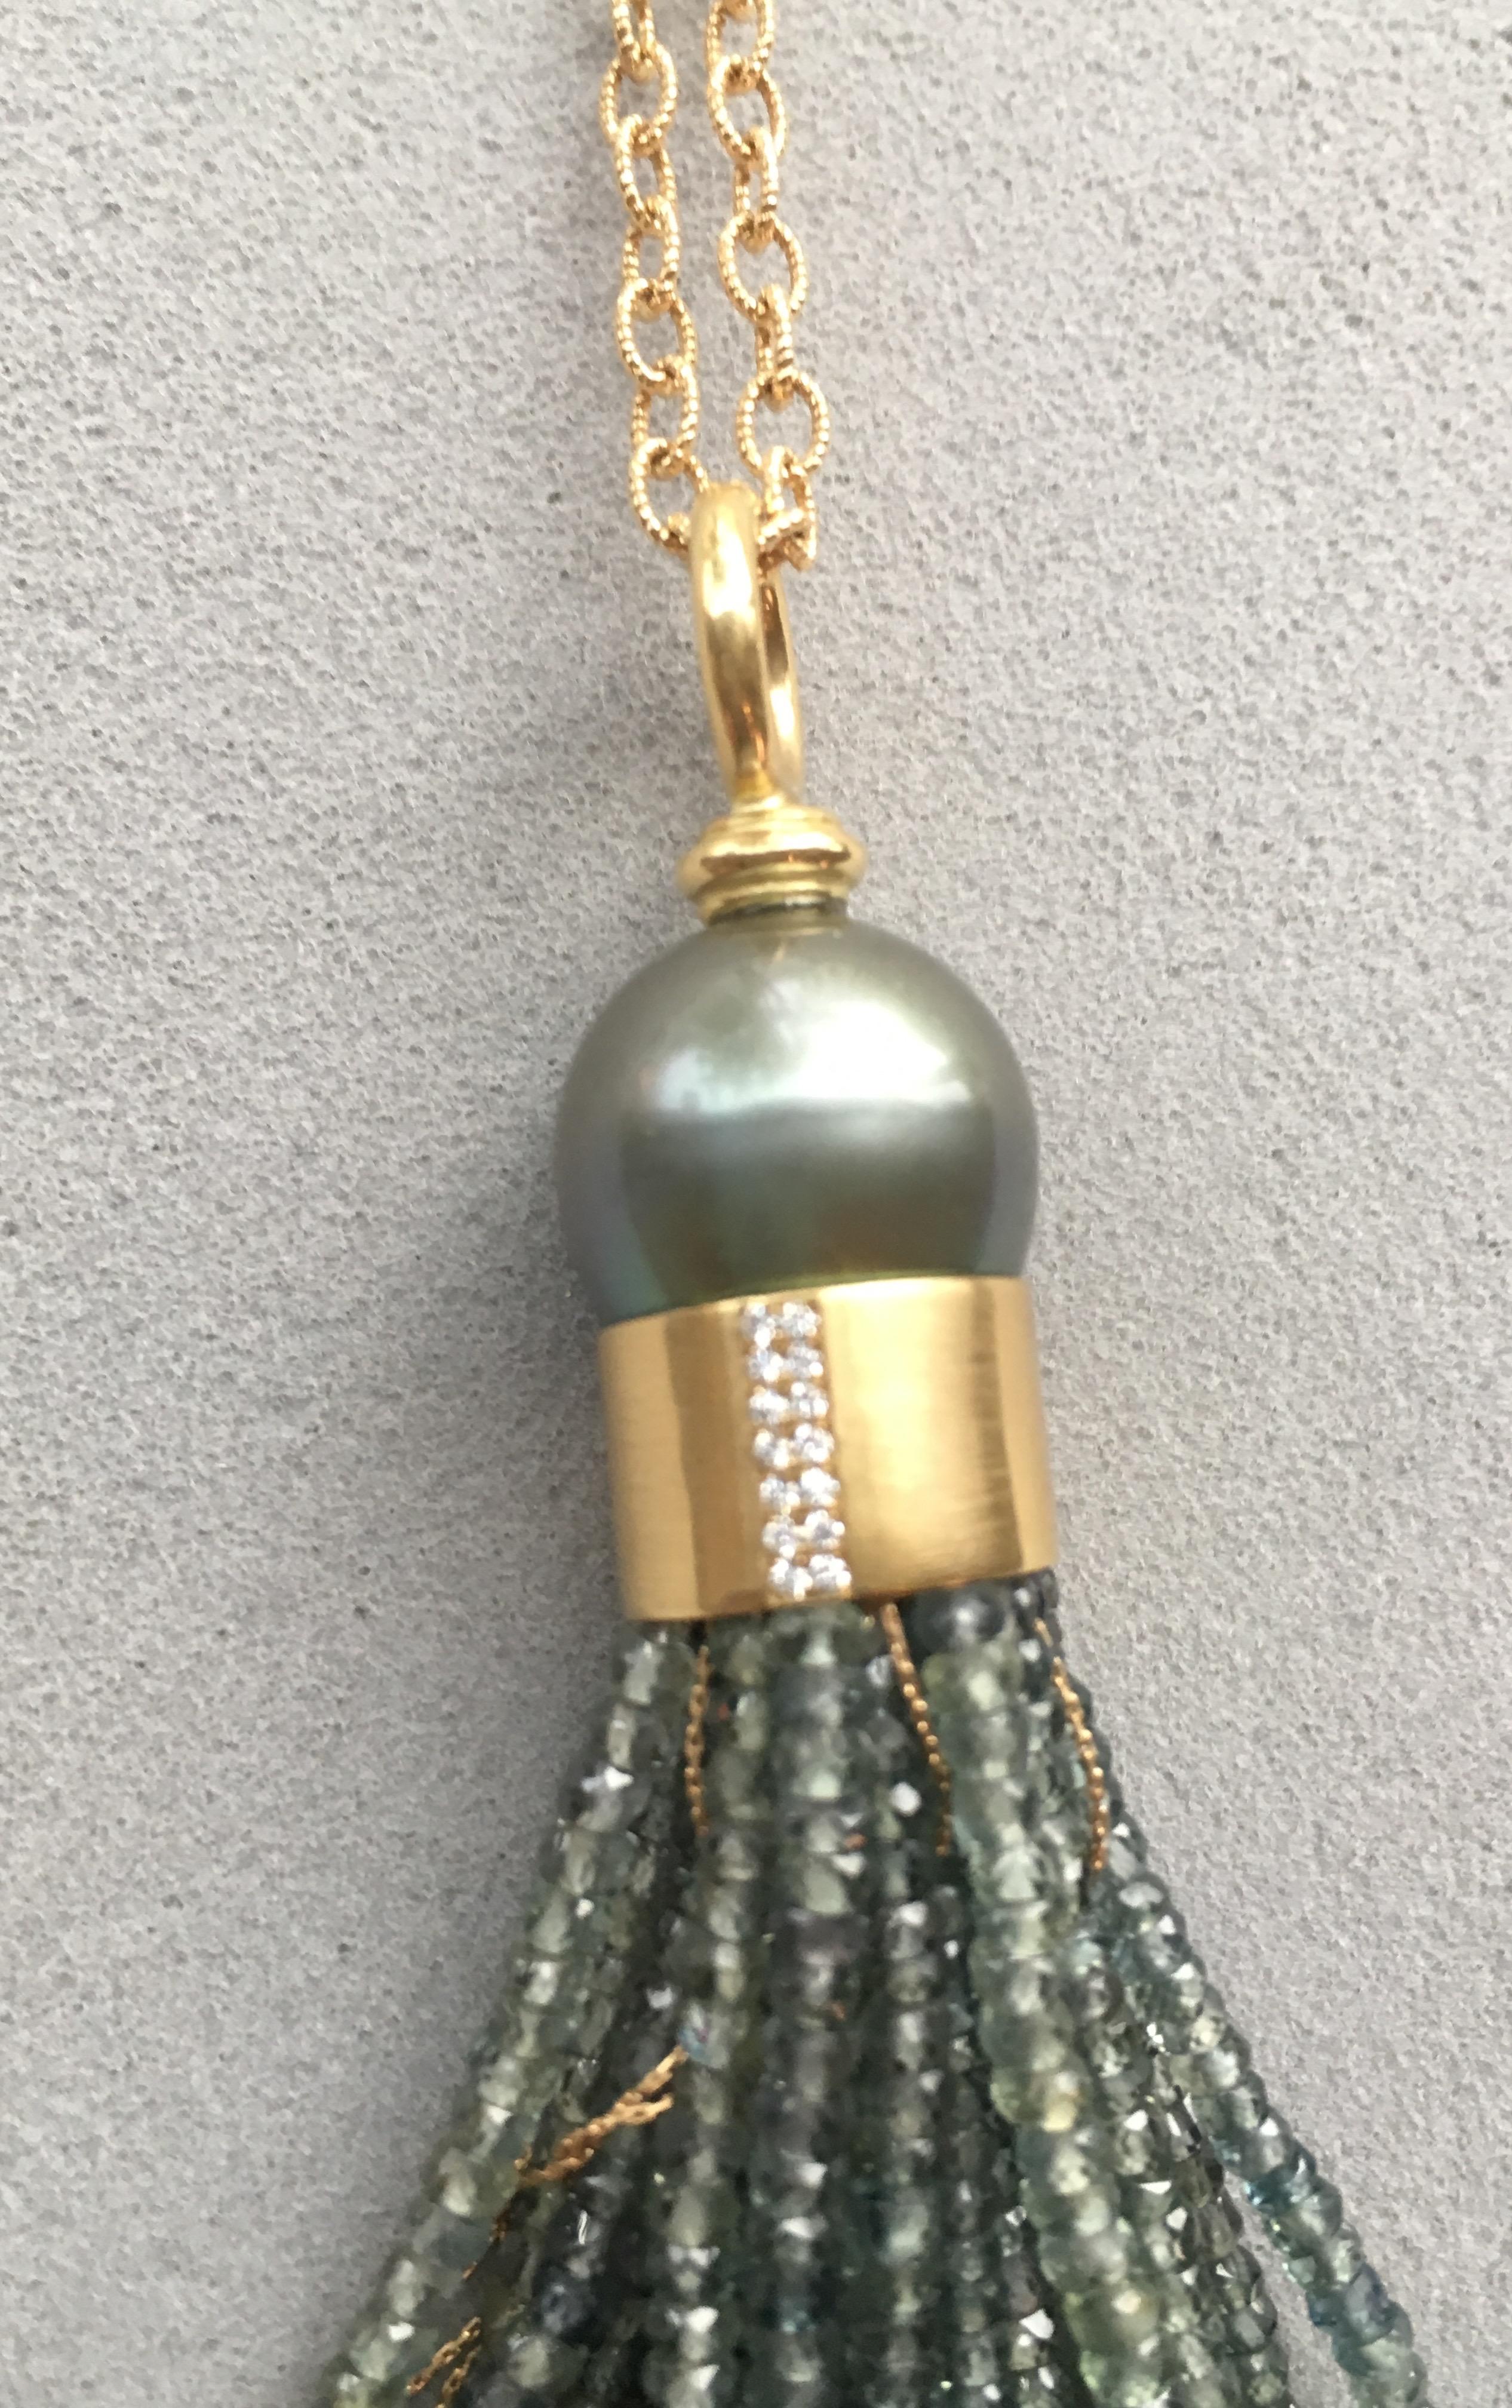 A fabulous 18 Karat yellow gold tassel with a pistachio Tahitian pearl.  Can be dressed  up or down and a favourite for all ages.

The tassel has a 14mm pistachio color Tahitian pearl, beautiful green sapphire beads intertwined with thin gold chain